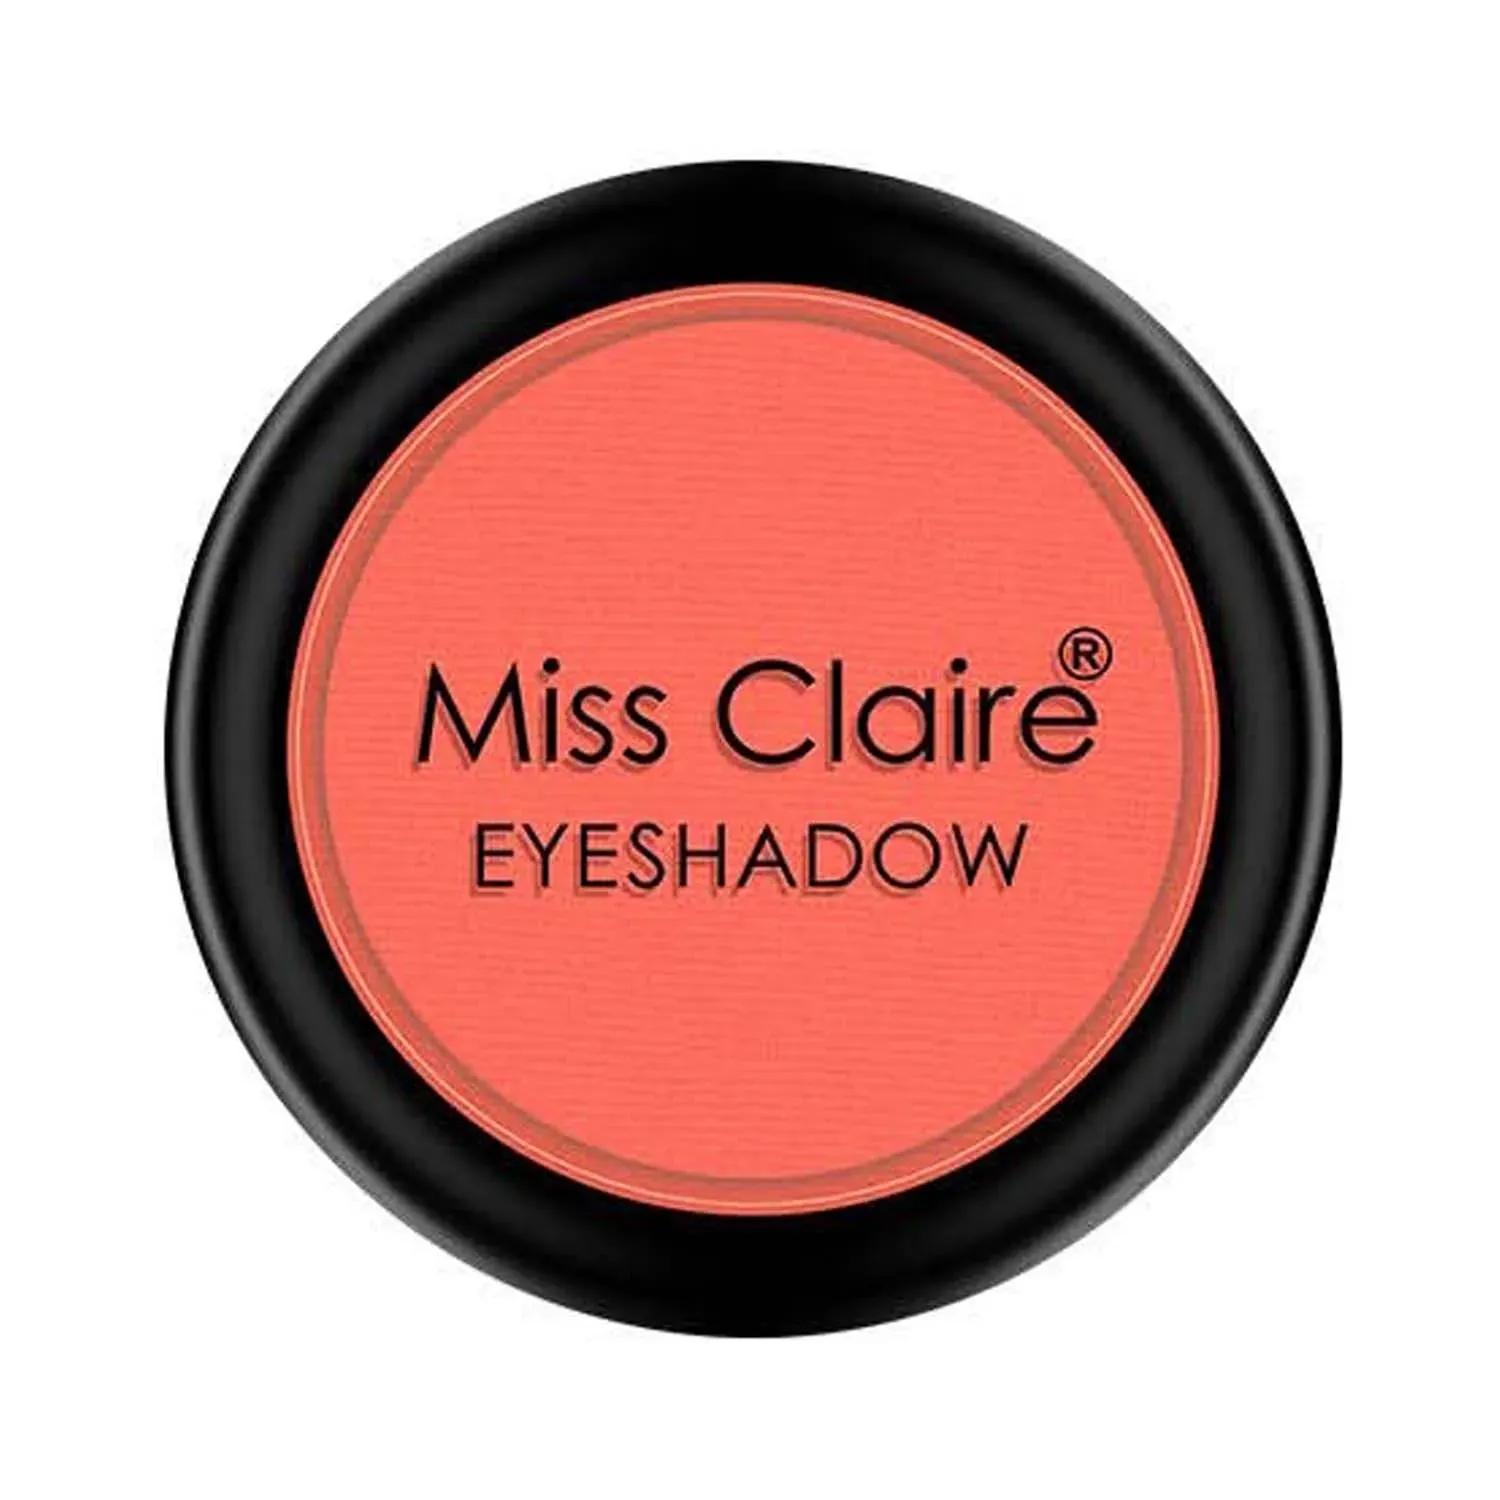 Miss Claire Single Eyeshadow - 0656 (2g)